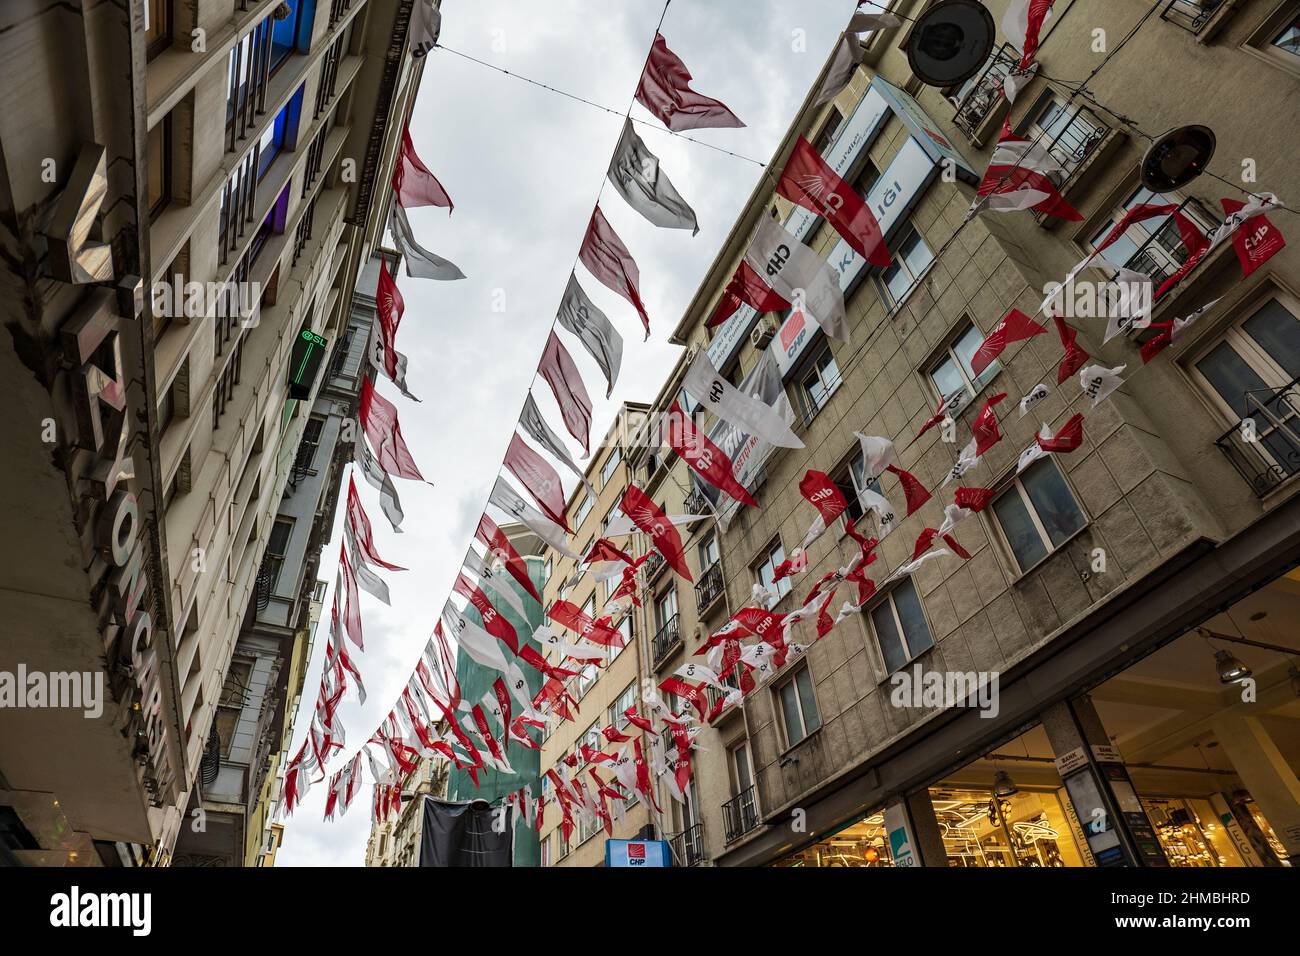 Istanbul, Turkey - November 2021 -  Republican People's Party (CHP) flags with logo.  CHP is the main opposition political party in Turkey. Stock Photo